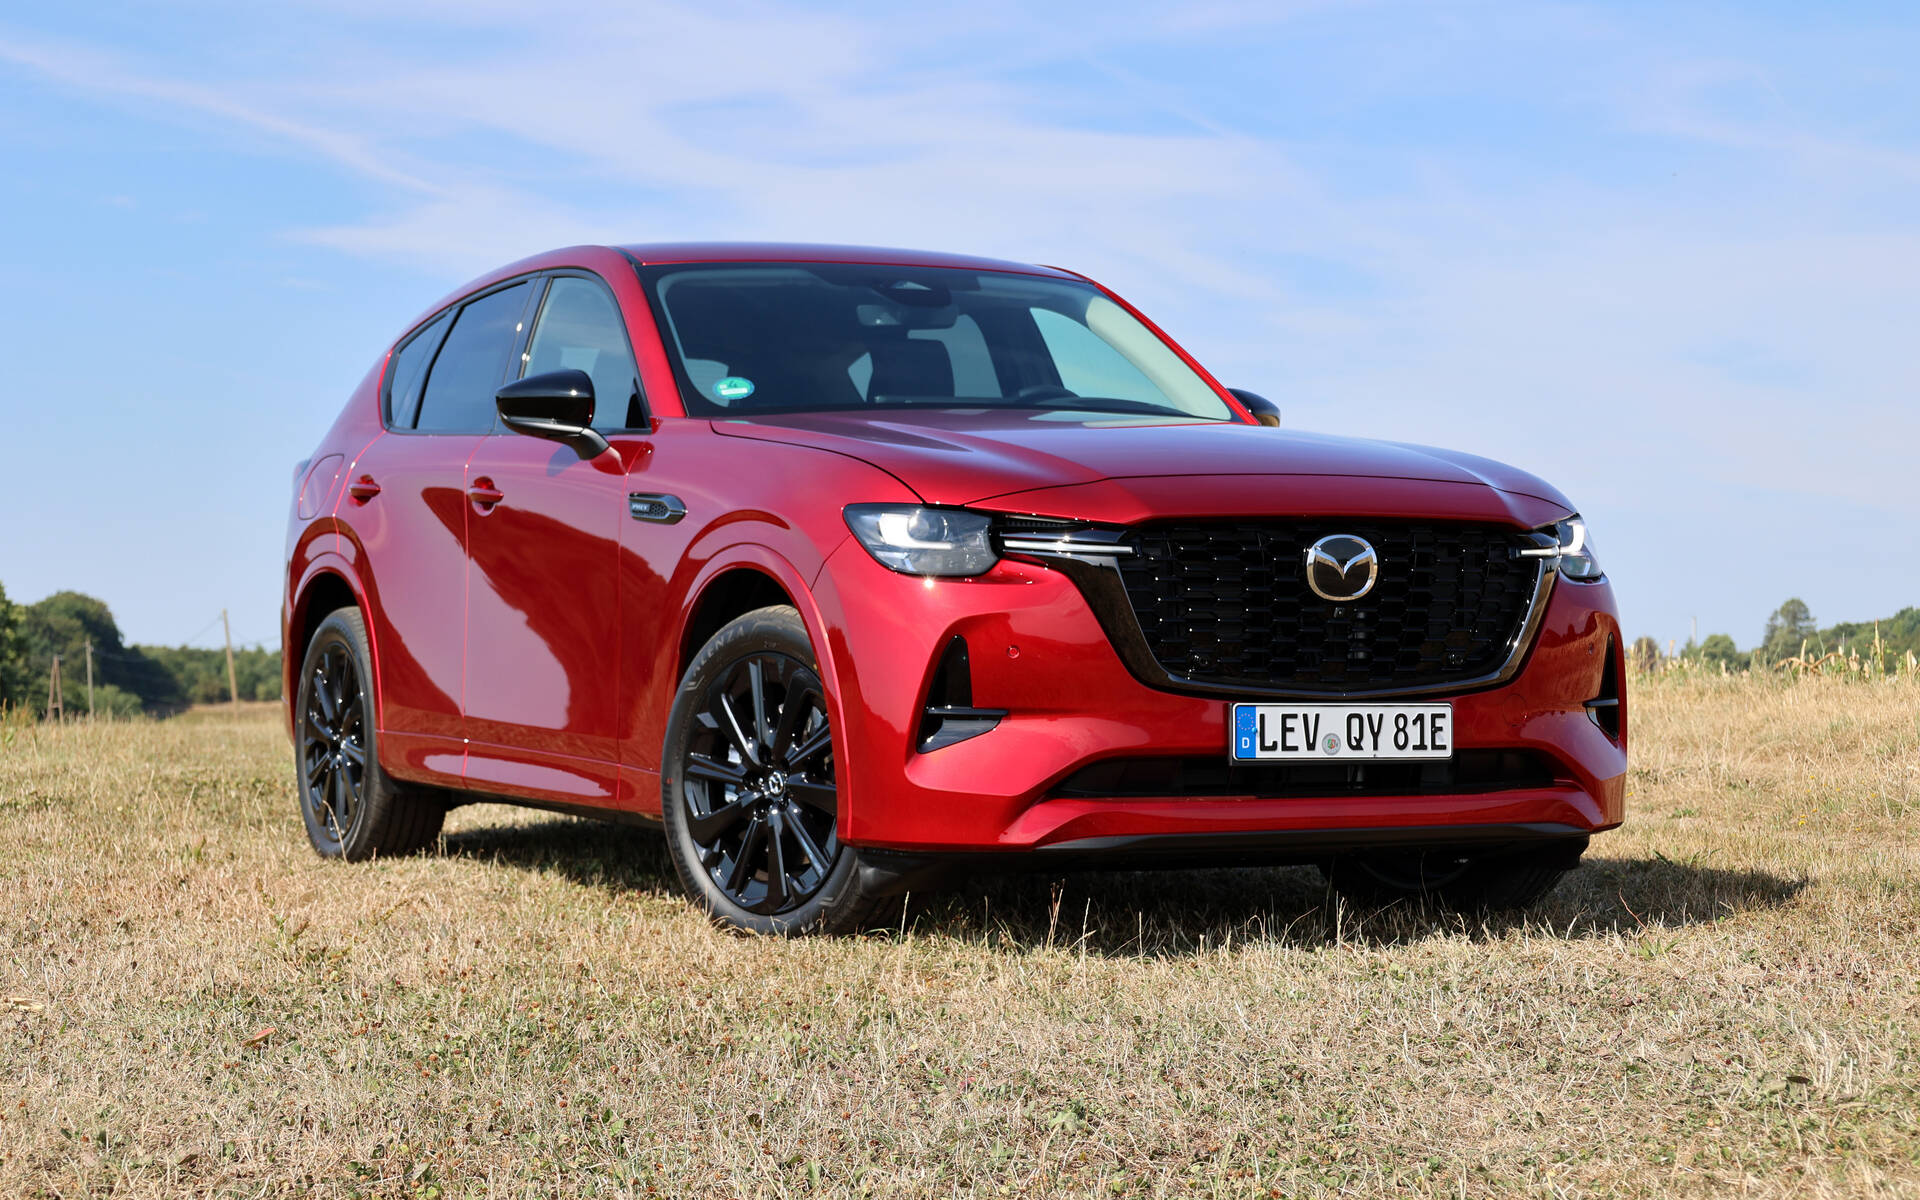 New Mazda CX-5 Planned, Could Launch In 2025 With Hybrid Powertrain